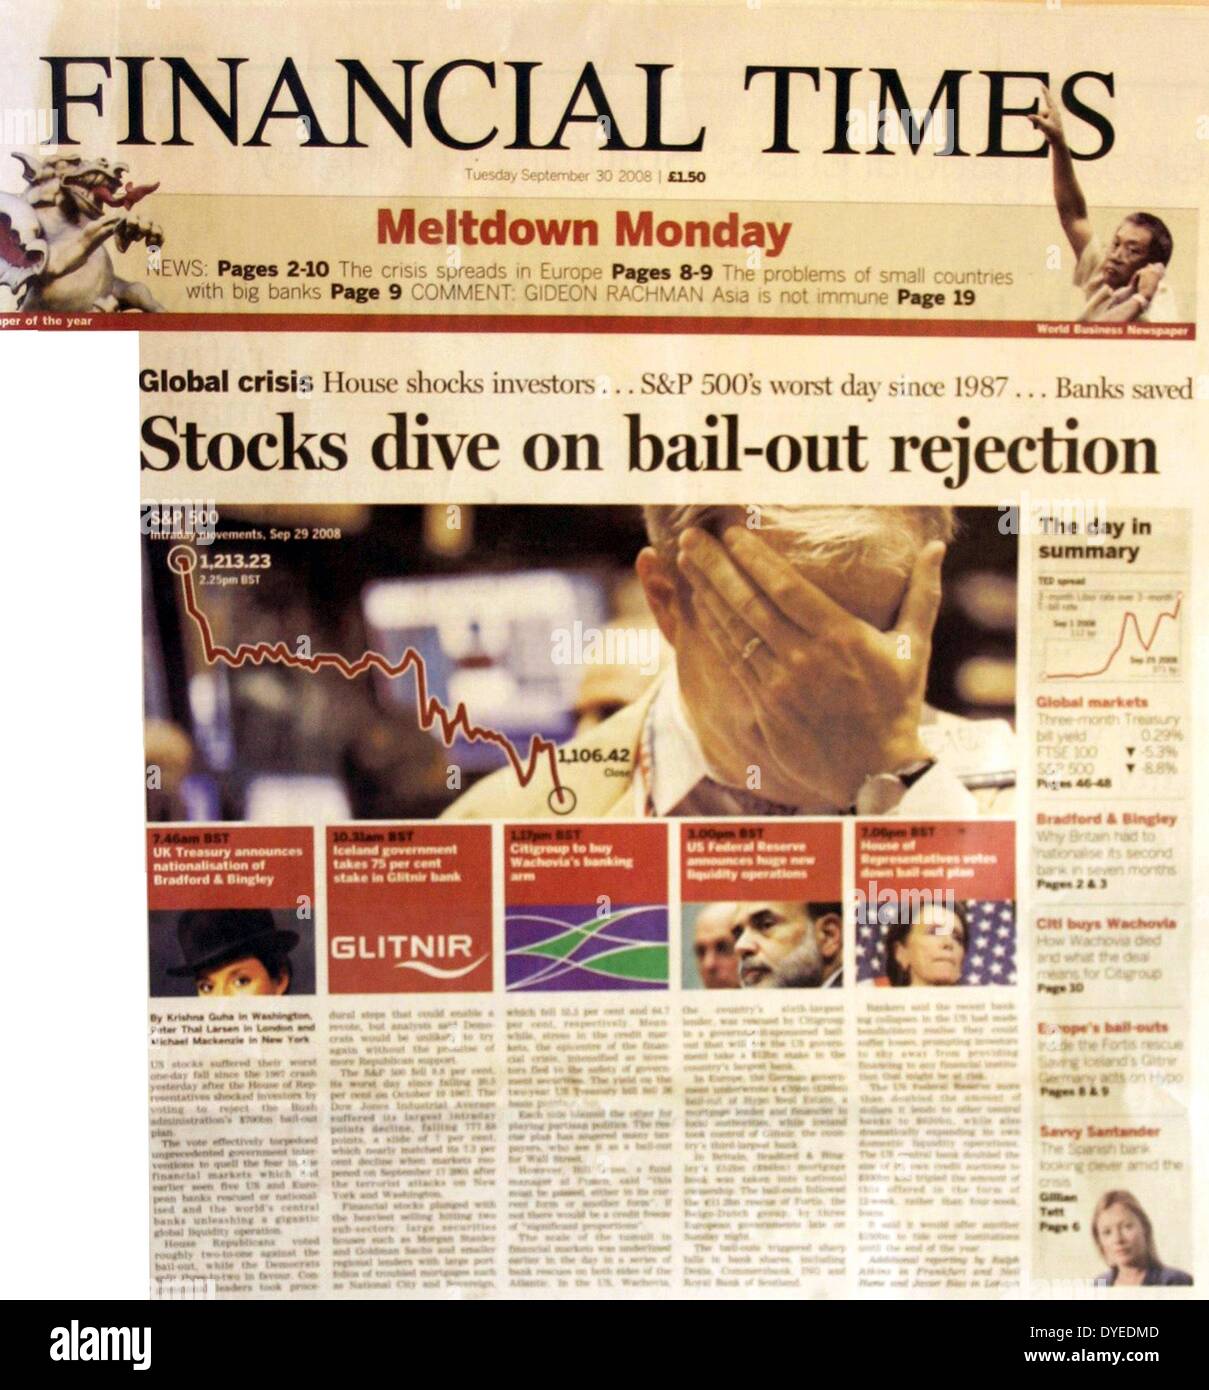 Front page of the Financial Times 2008. Stocks dive on bail-out rejection. Stock Photo